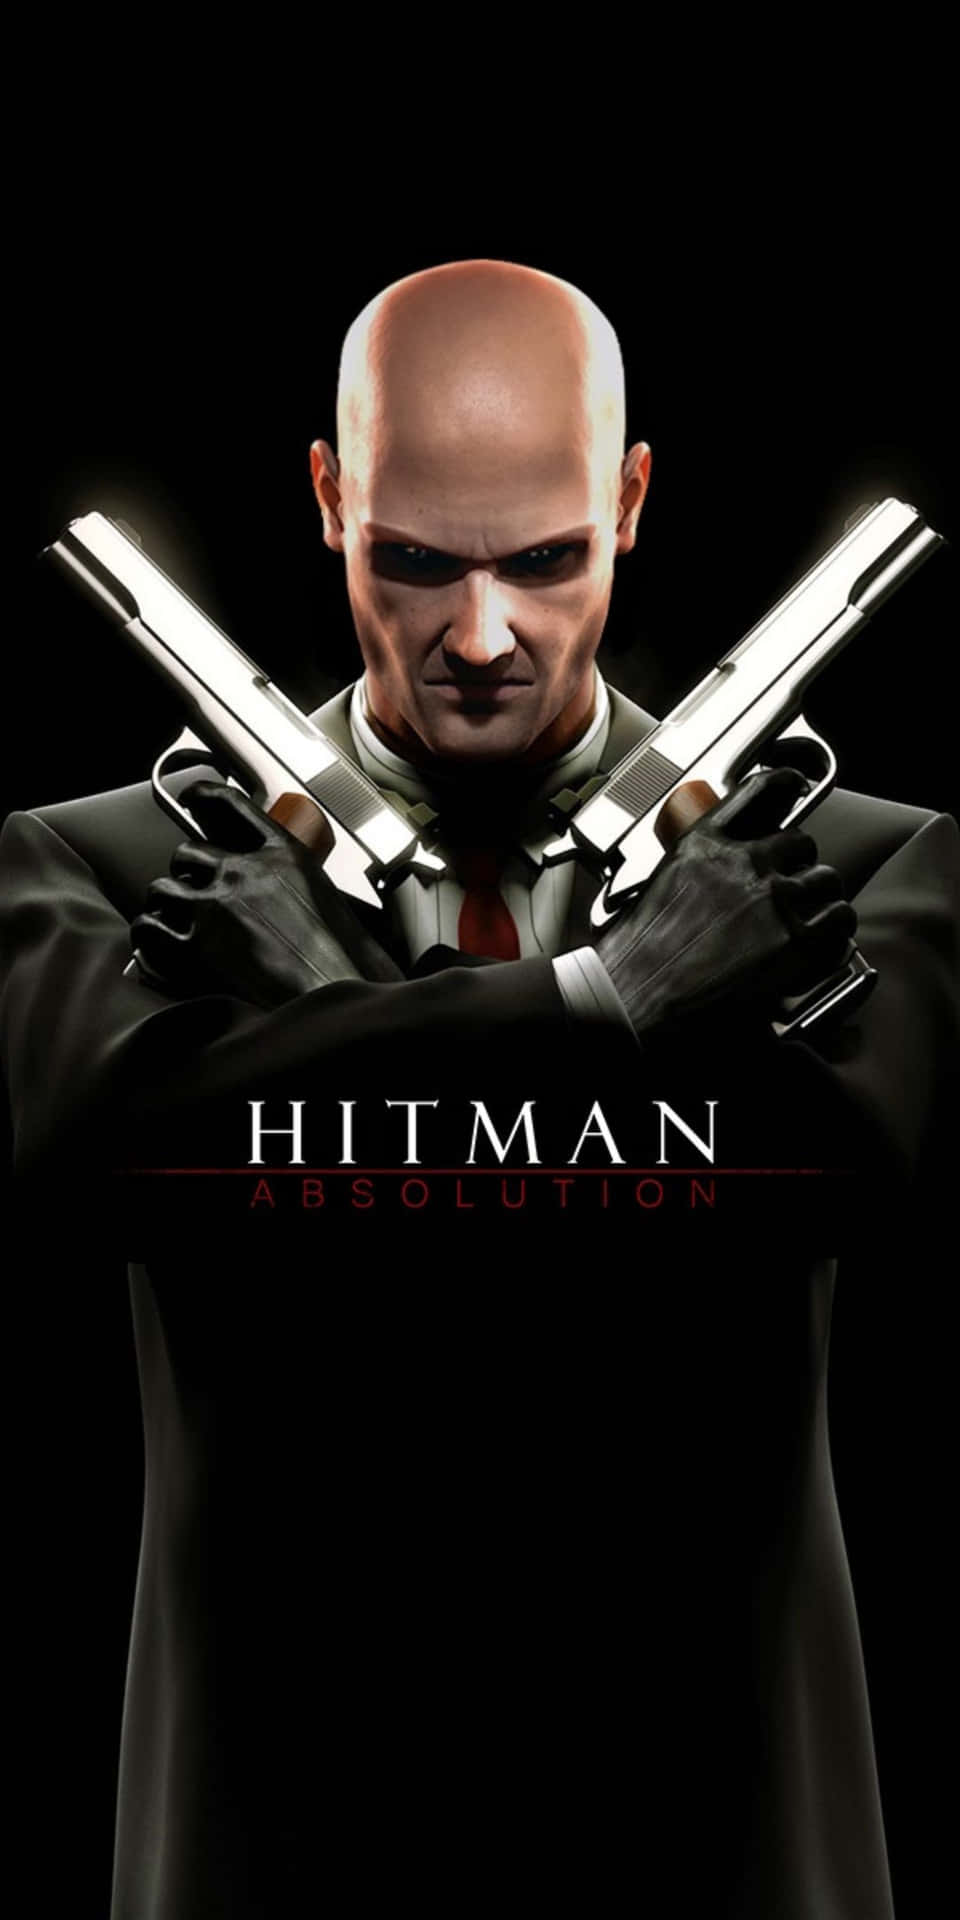 Strike from the shadows and take vengeance with the Pixel 3 and Hitman Absolution